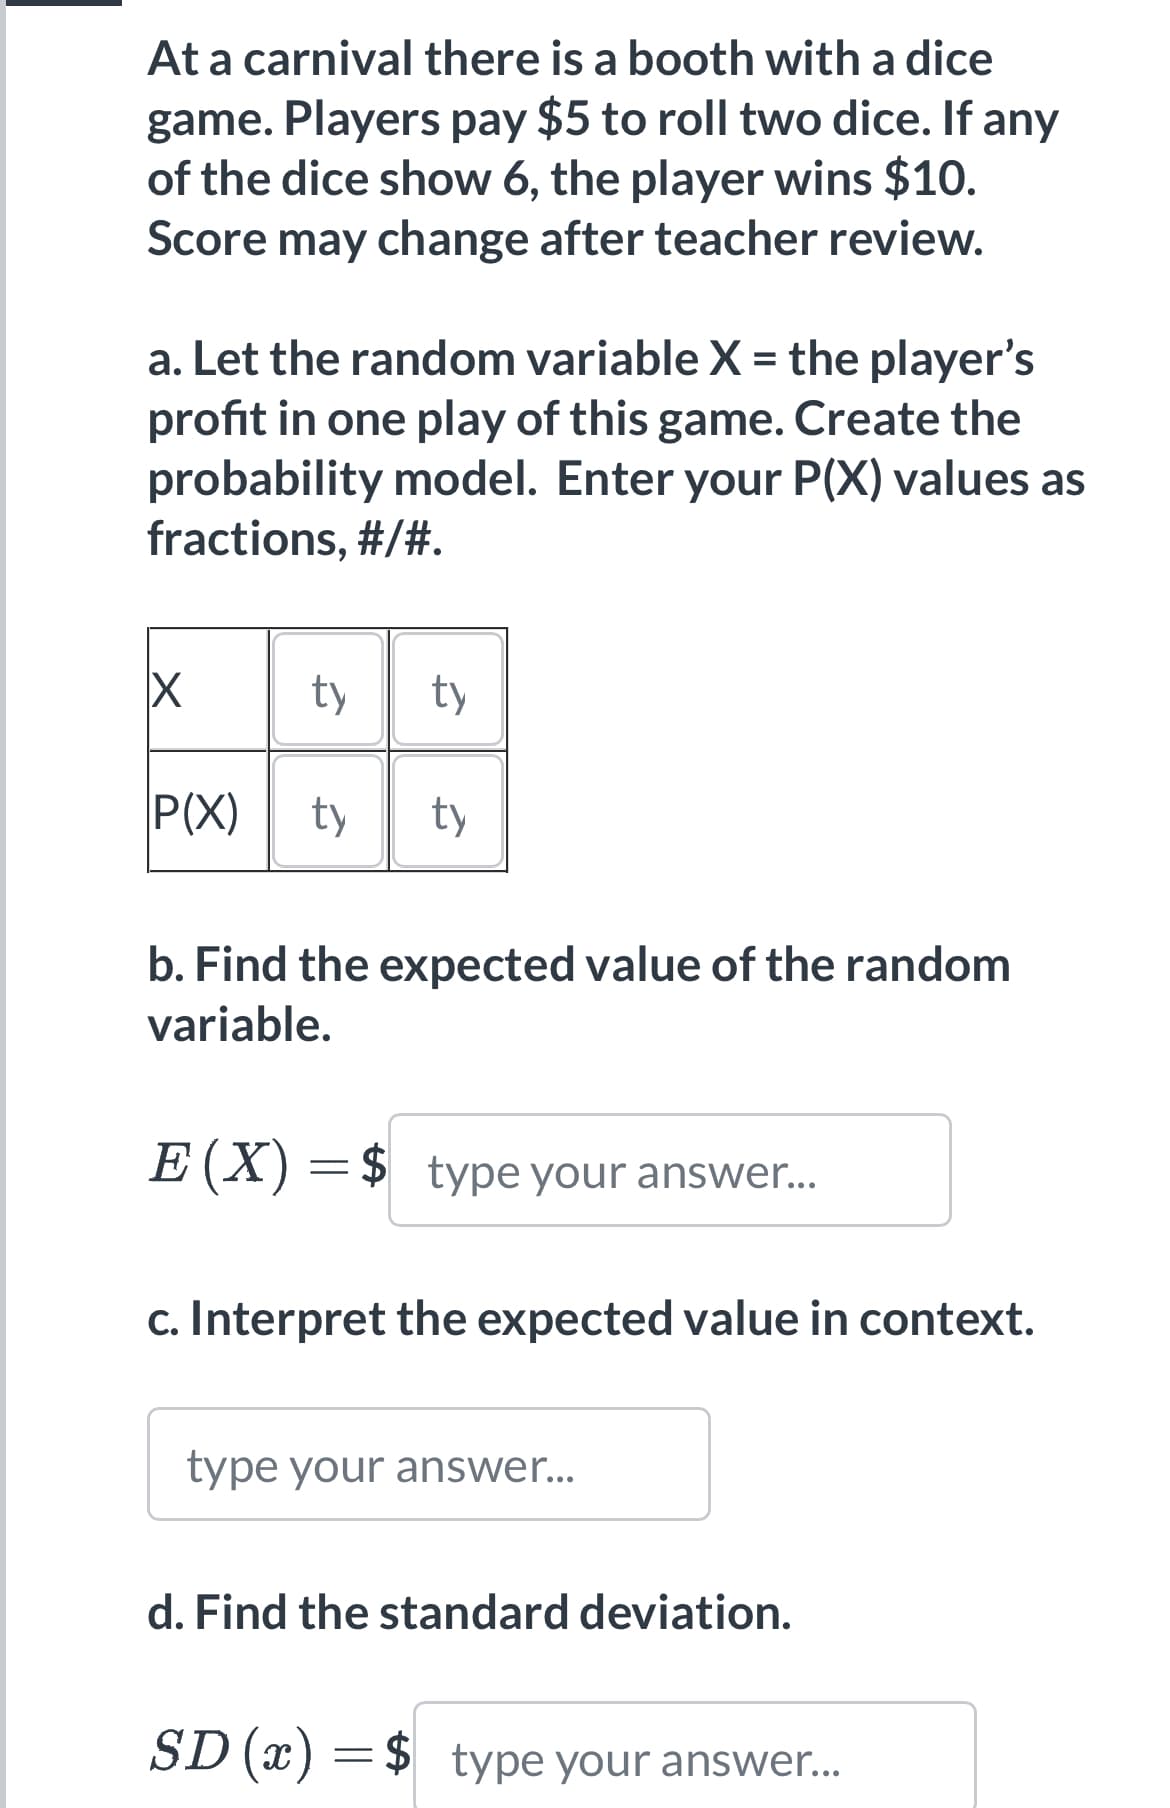 At a carnival there is a booth with a dice
game. Players pay $5 to roll two dice. If any
of the dice show 6, the player wins $10.
Score may change after teacher review.
a. Let the random variable X = the player's
profit in one play of this game. Create the
probability model. Enter your P(X) values as
fractions, #/#.
X
P(X)
ty ty
ty ty
b. Find the expected value of the random
variable.
E (X) = $ type your answer...
c. Interpret the expected value in context.
type your answer...
d. Find the standard deviation.
SD (x) = $ type your answer...